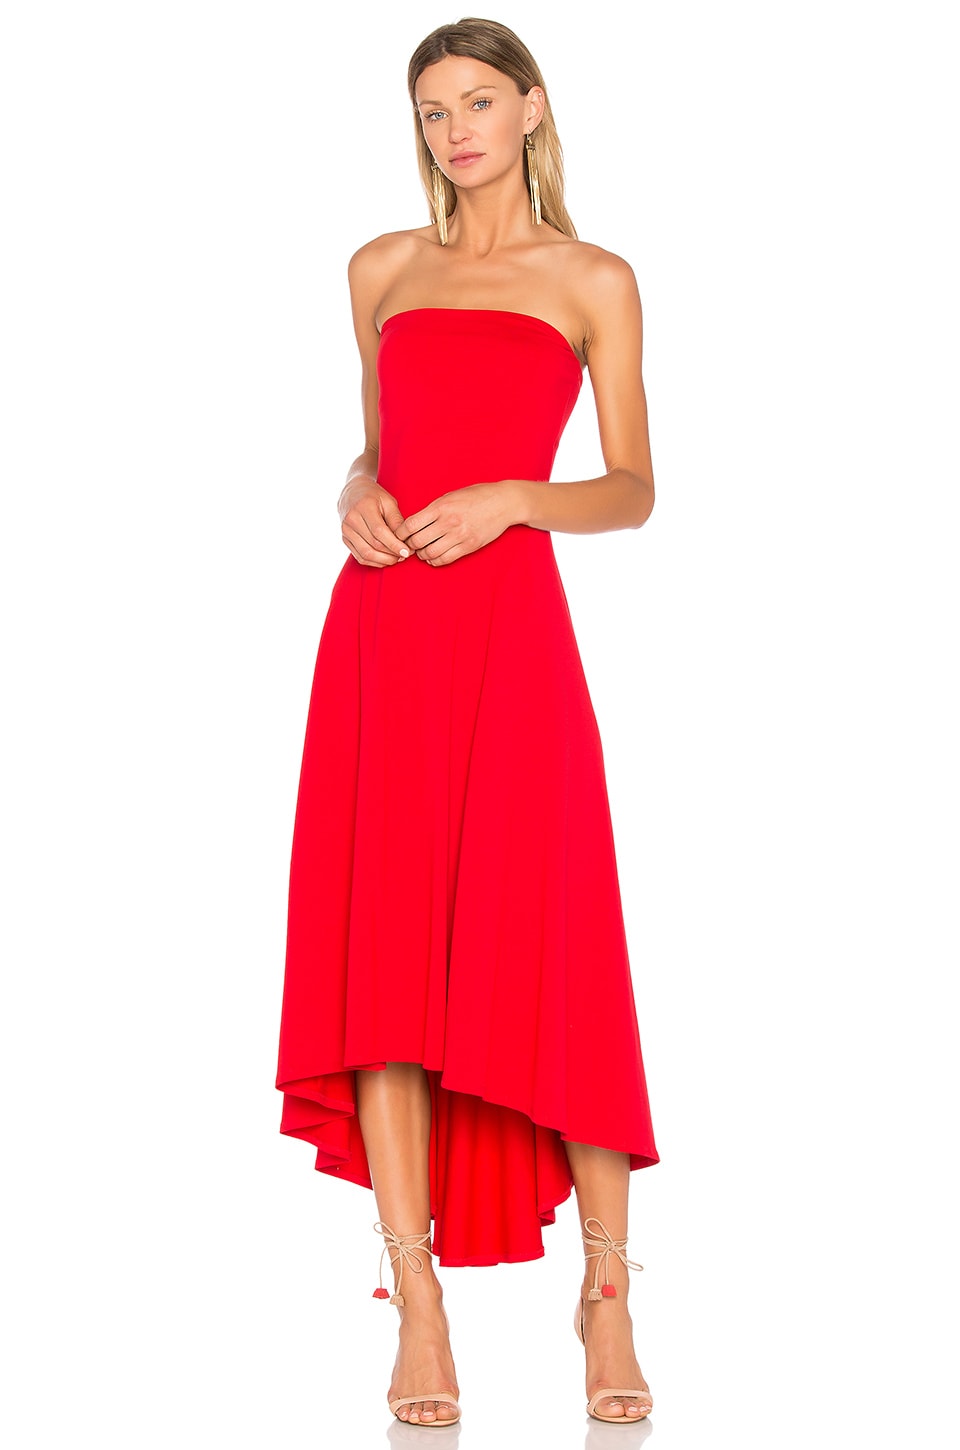 Susana Monaco Strapless Hi Low Dress in Perfect Red SIZE X-SMALL